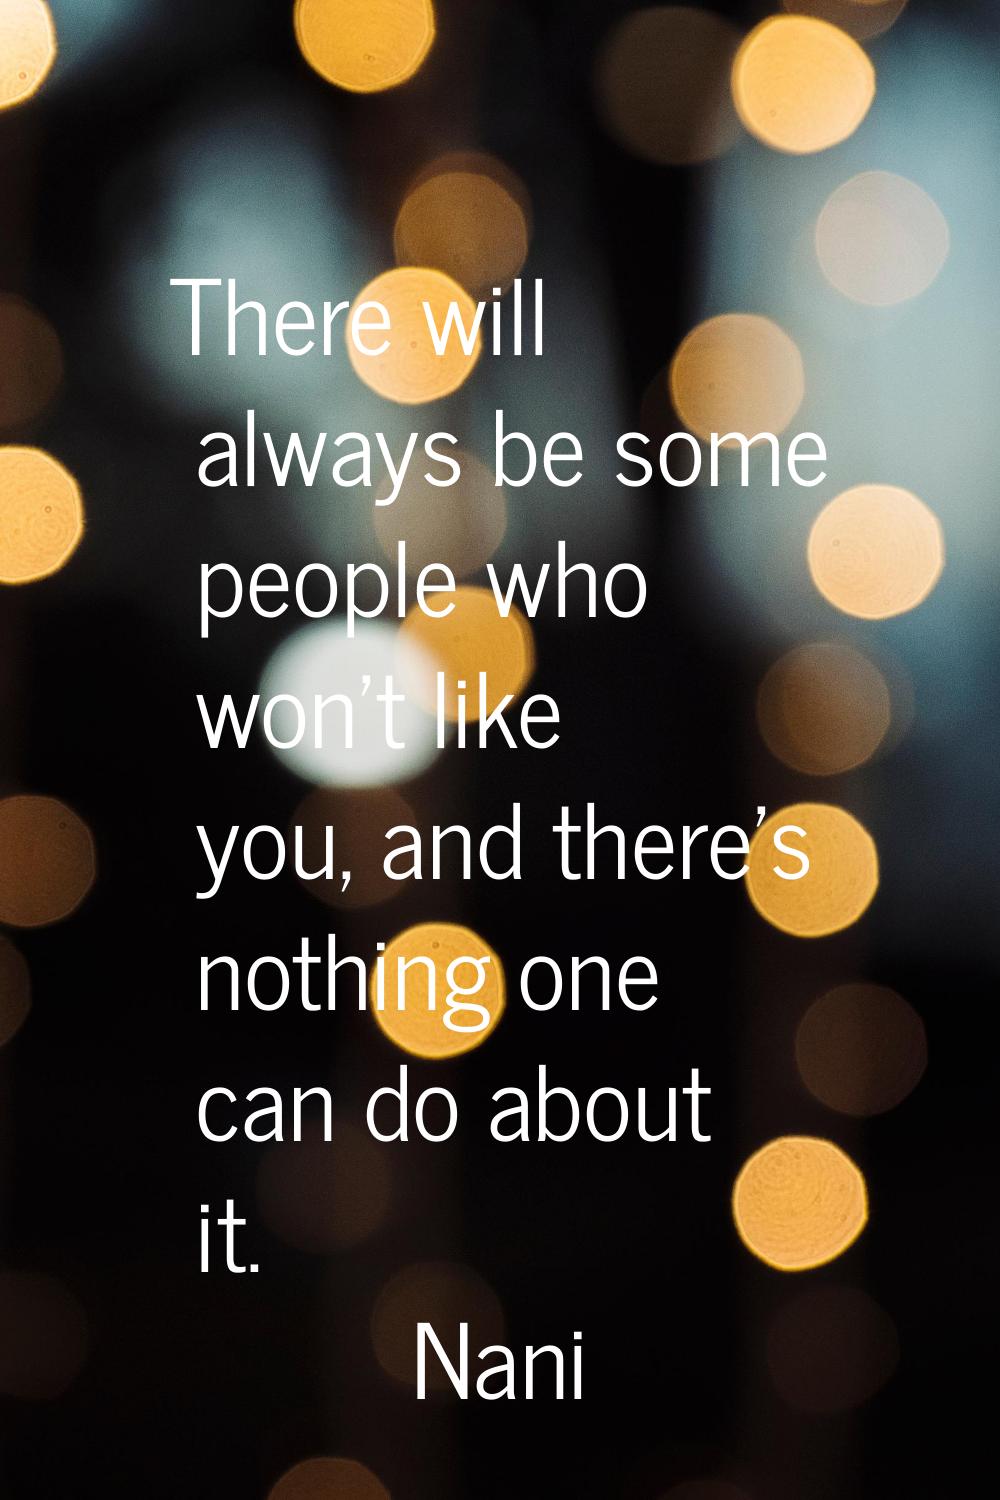 There will always be some people who won't like you, and there's nothing one can do about it.